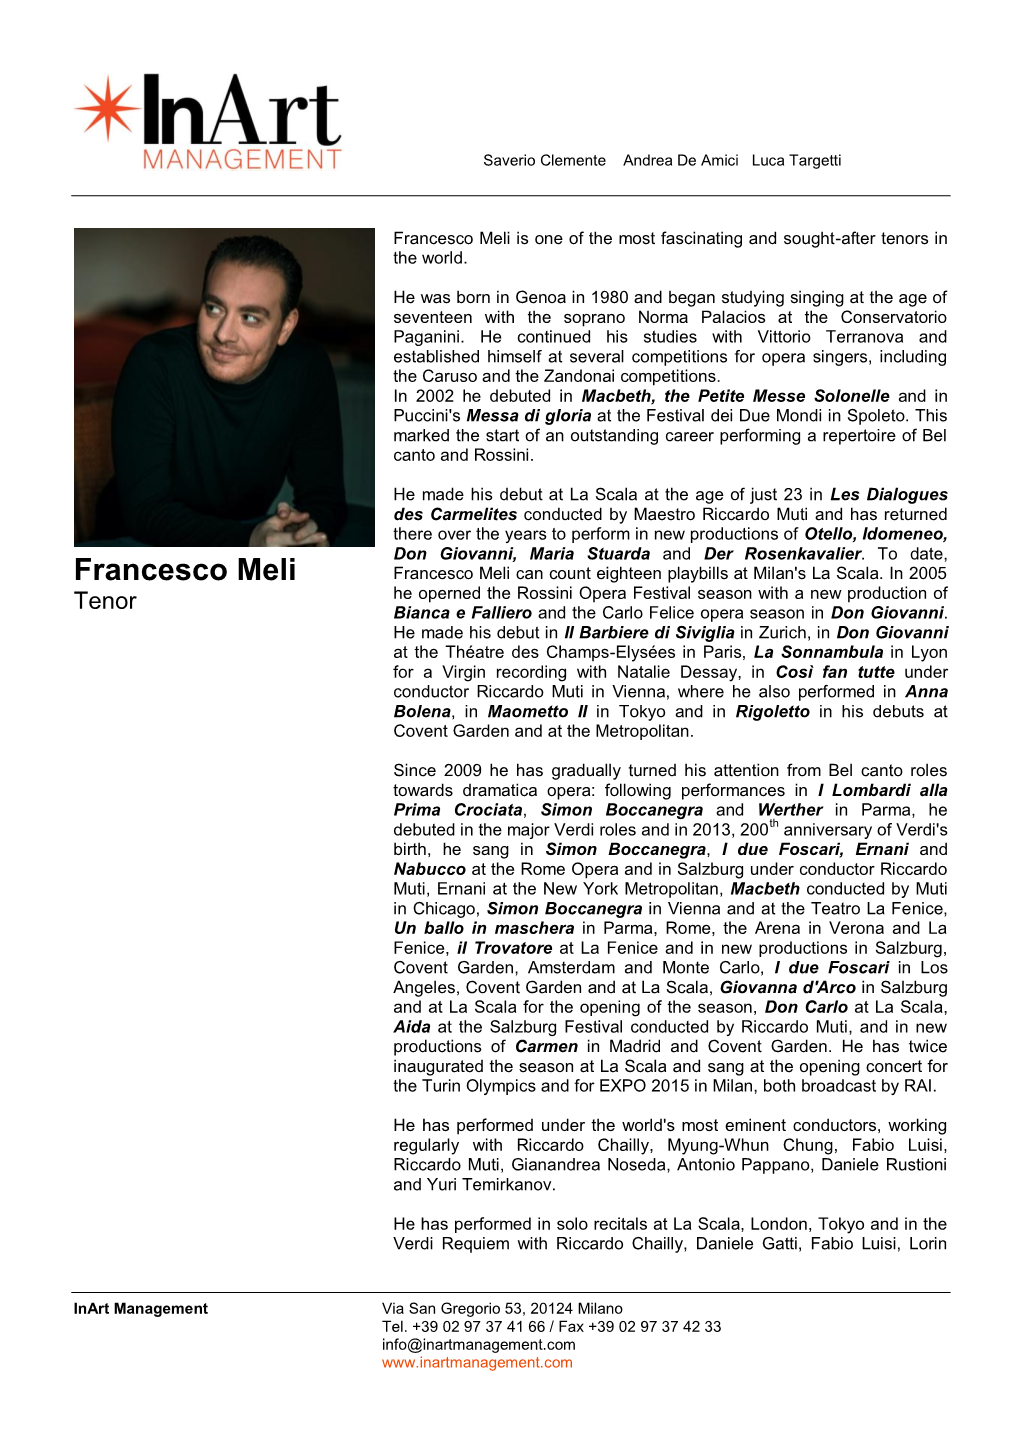 Francesco Meli Is One of the Most Fascinating and Sought-After Tenors in the World